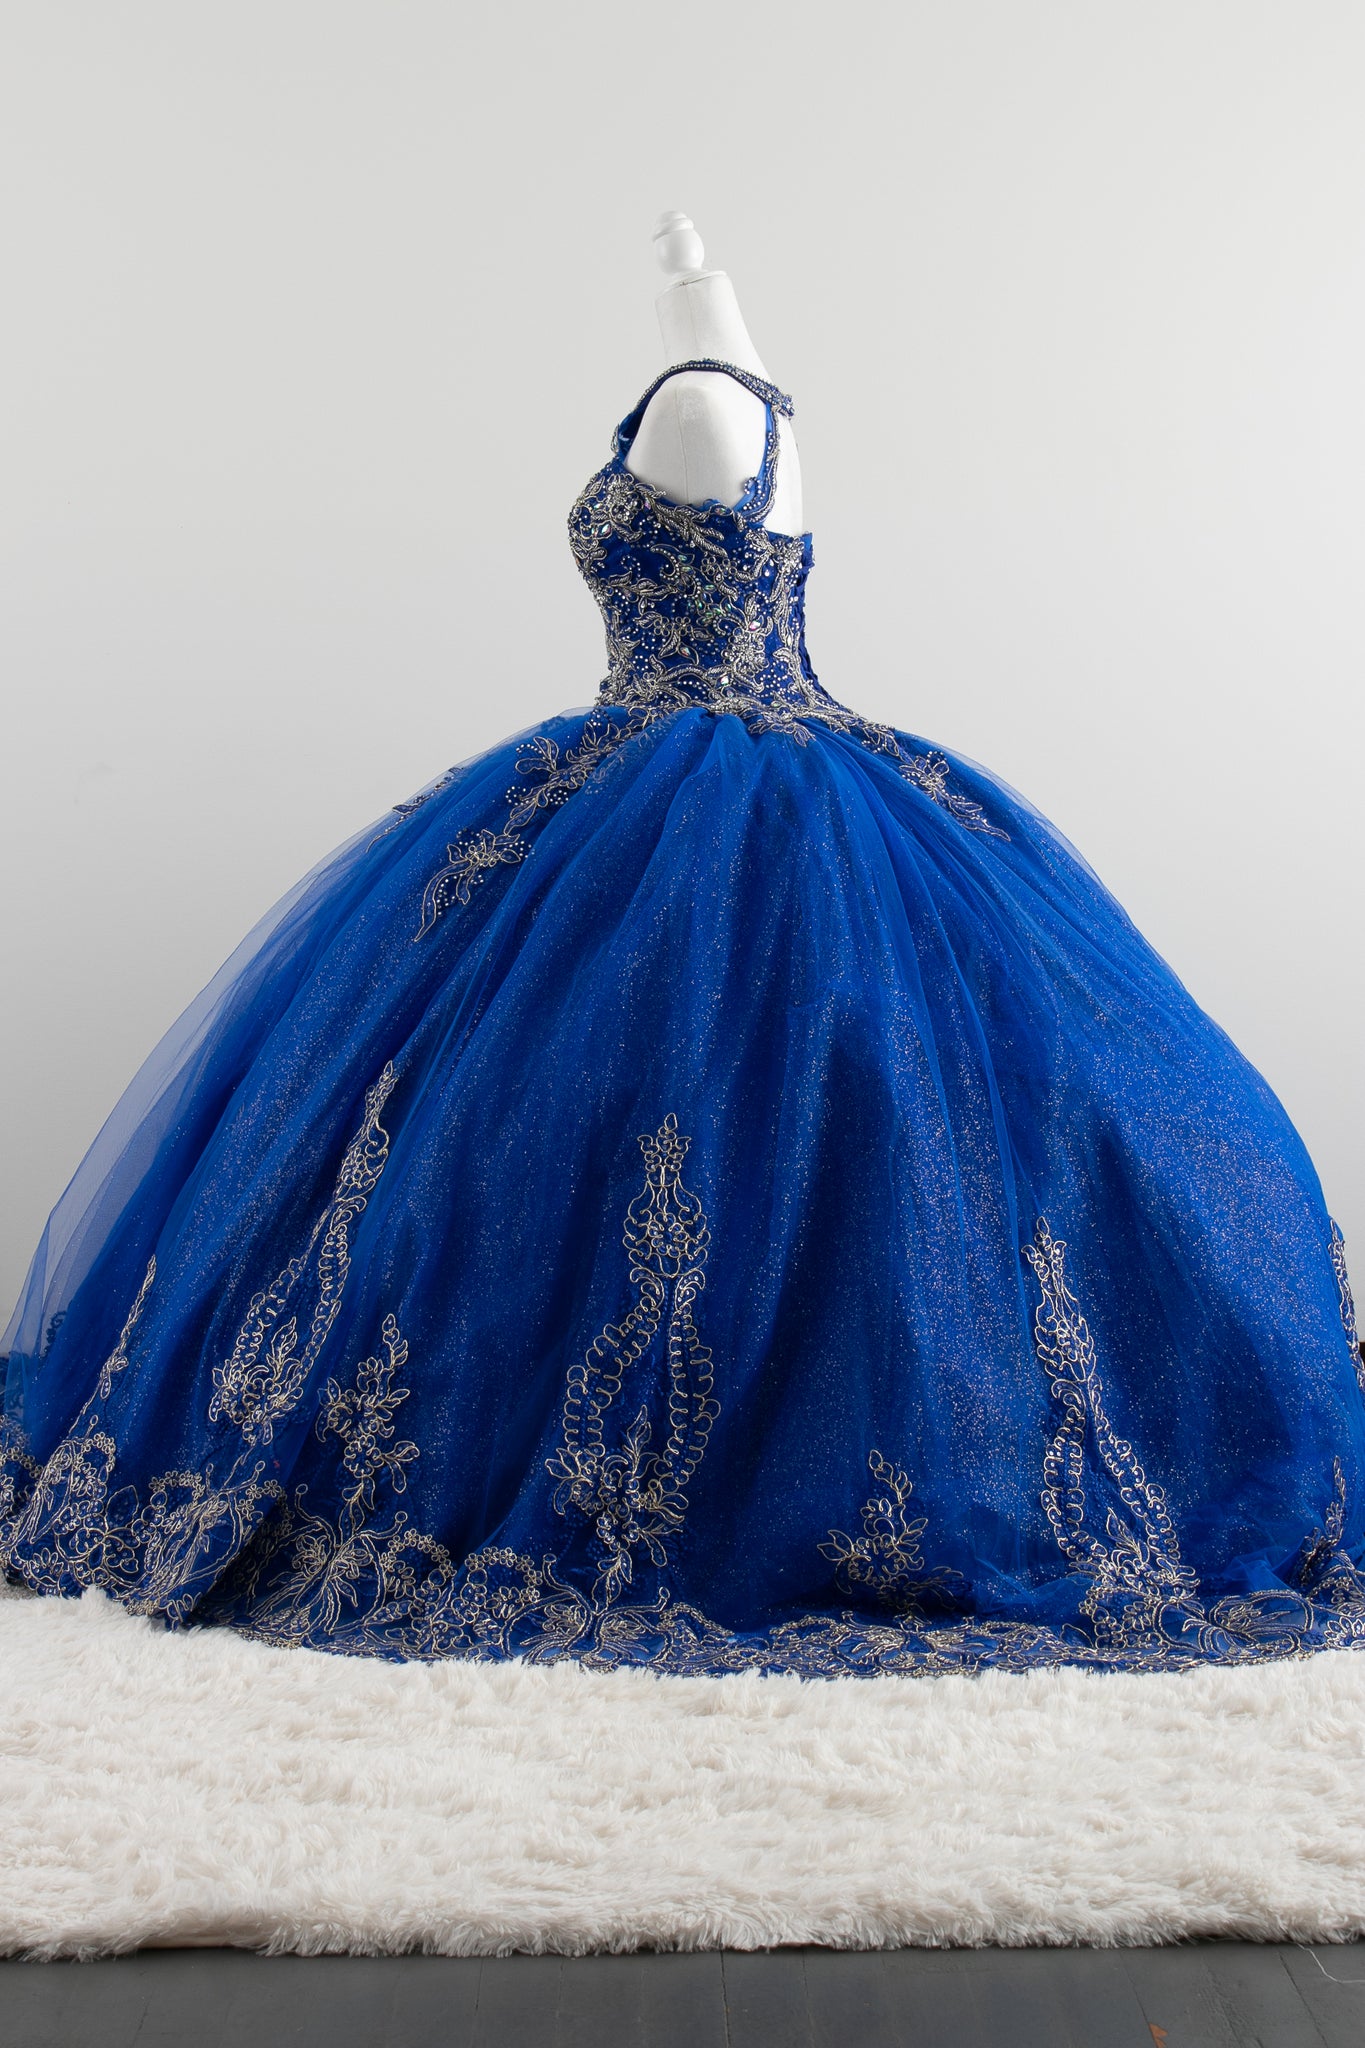 Sleeveless and strapless Royal Blue Quinceañera Dress